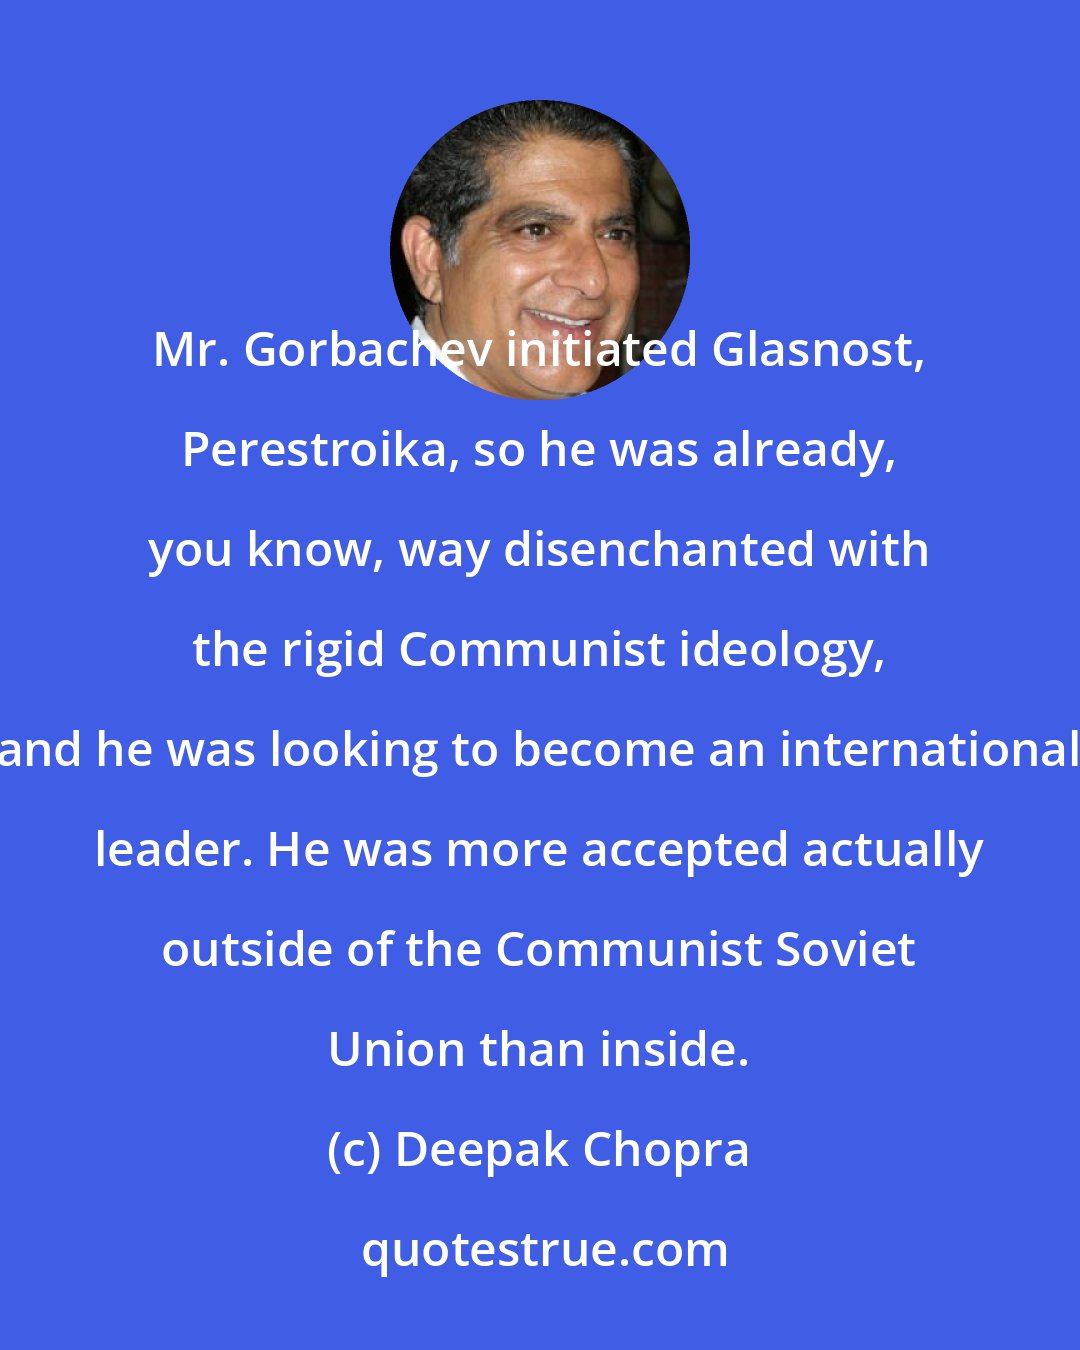 Deepak Chopra: Mr. Gorbachev initiated Glasnost, Perestroika, so he was already, you know, way disenchanted with the rigid Communist ideology, and he was looking to become an international leader. He was more accepted actually outside of the Communist Soviet Union than inside.